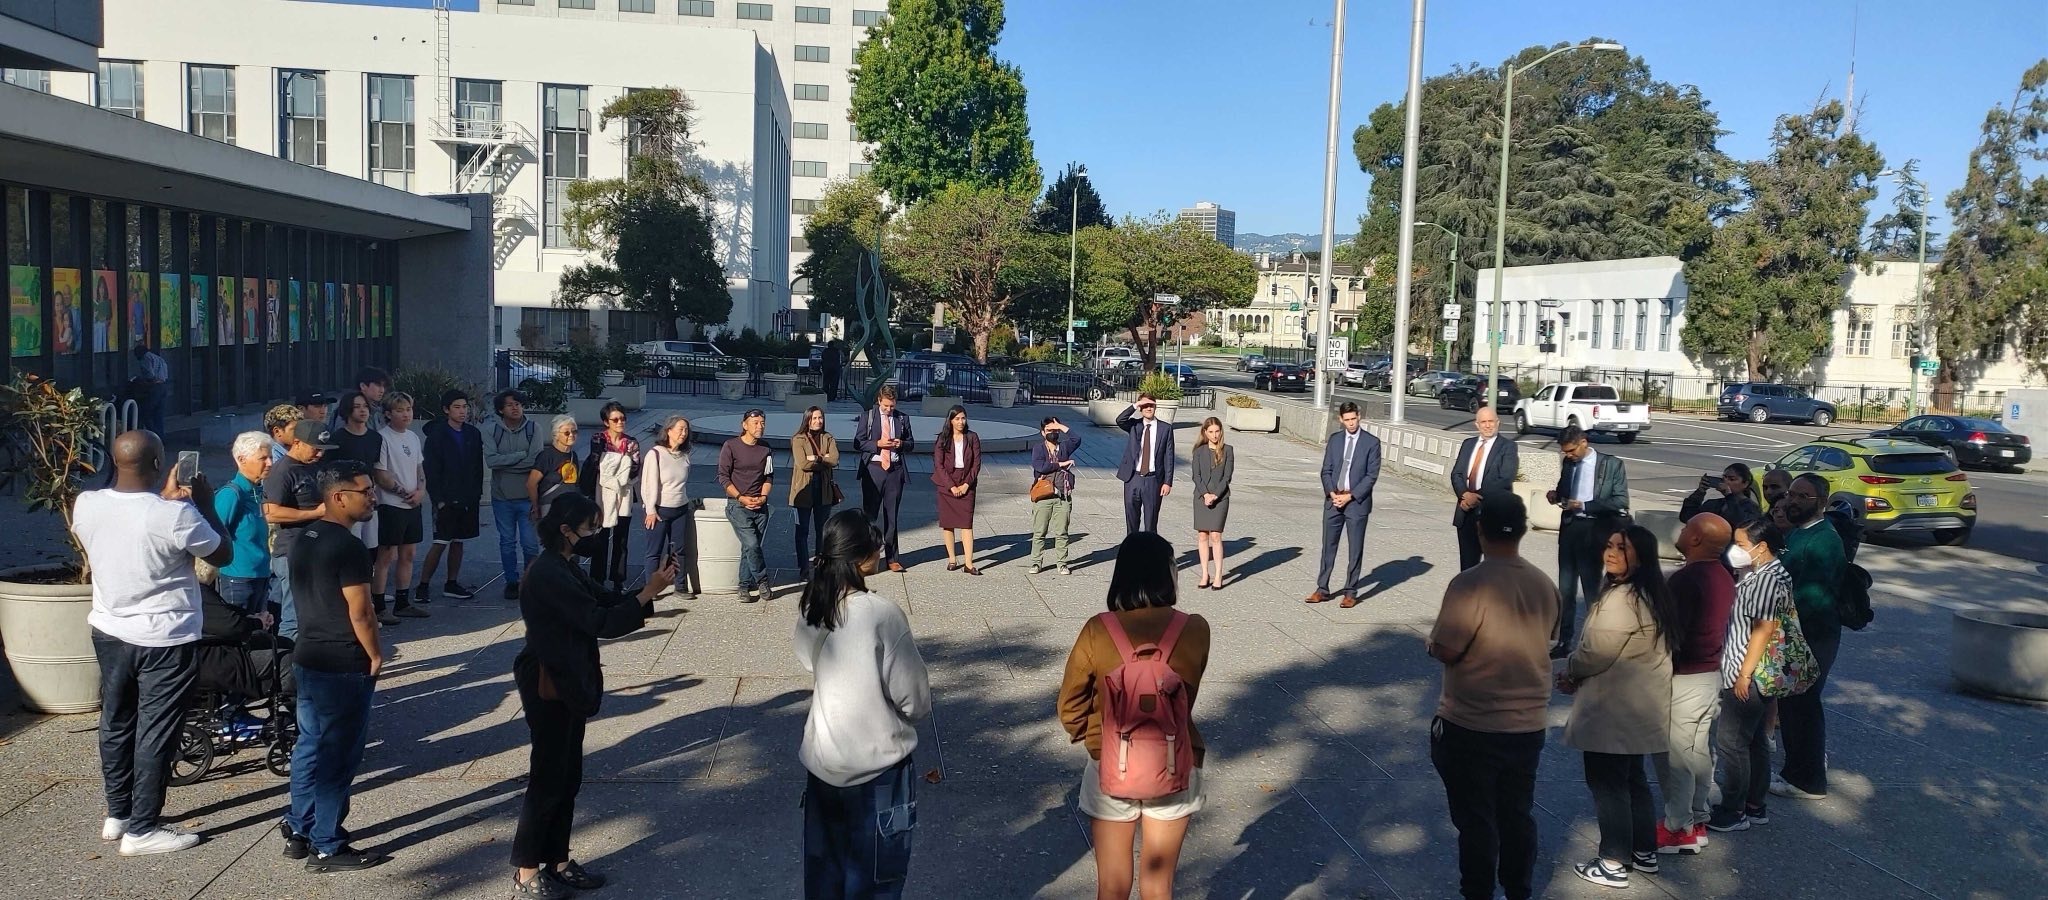 Community members, advocates, and attorneys gather outside an Oakland courthouse before a hearing in the APSC v. CDCR case. The group stands in a big circle on the plaza outside the courthouse.